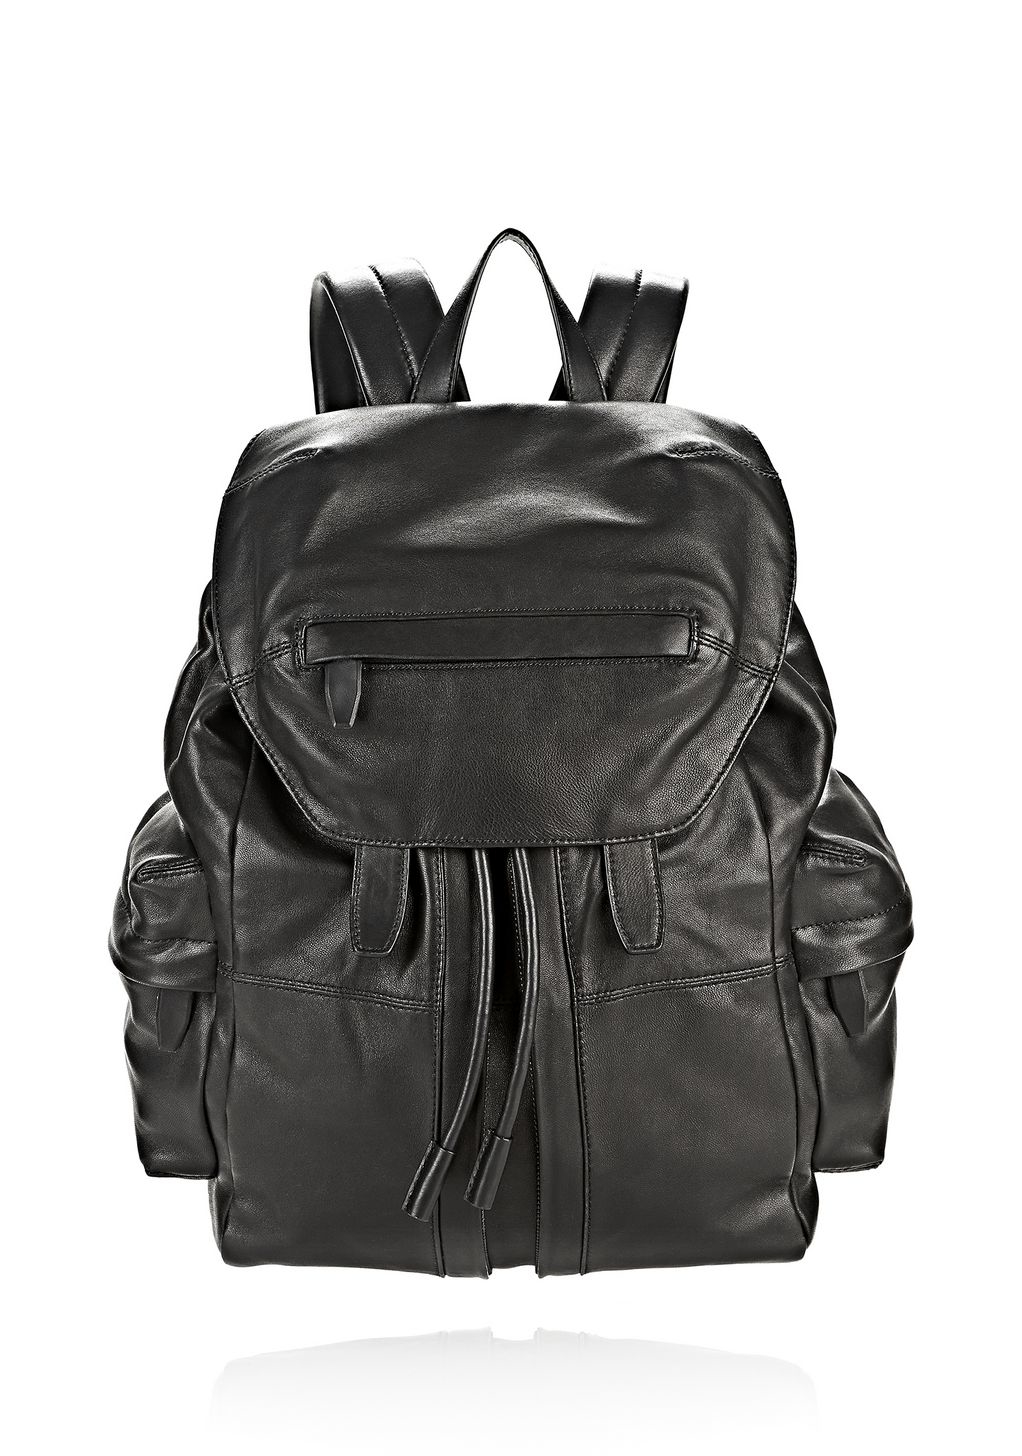 Lyst - Alexander wang Marti Backpack In Washed Black With Matte Black ...